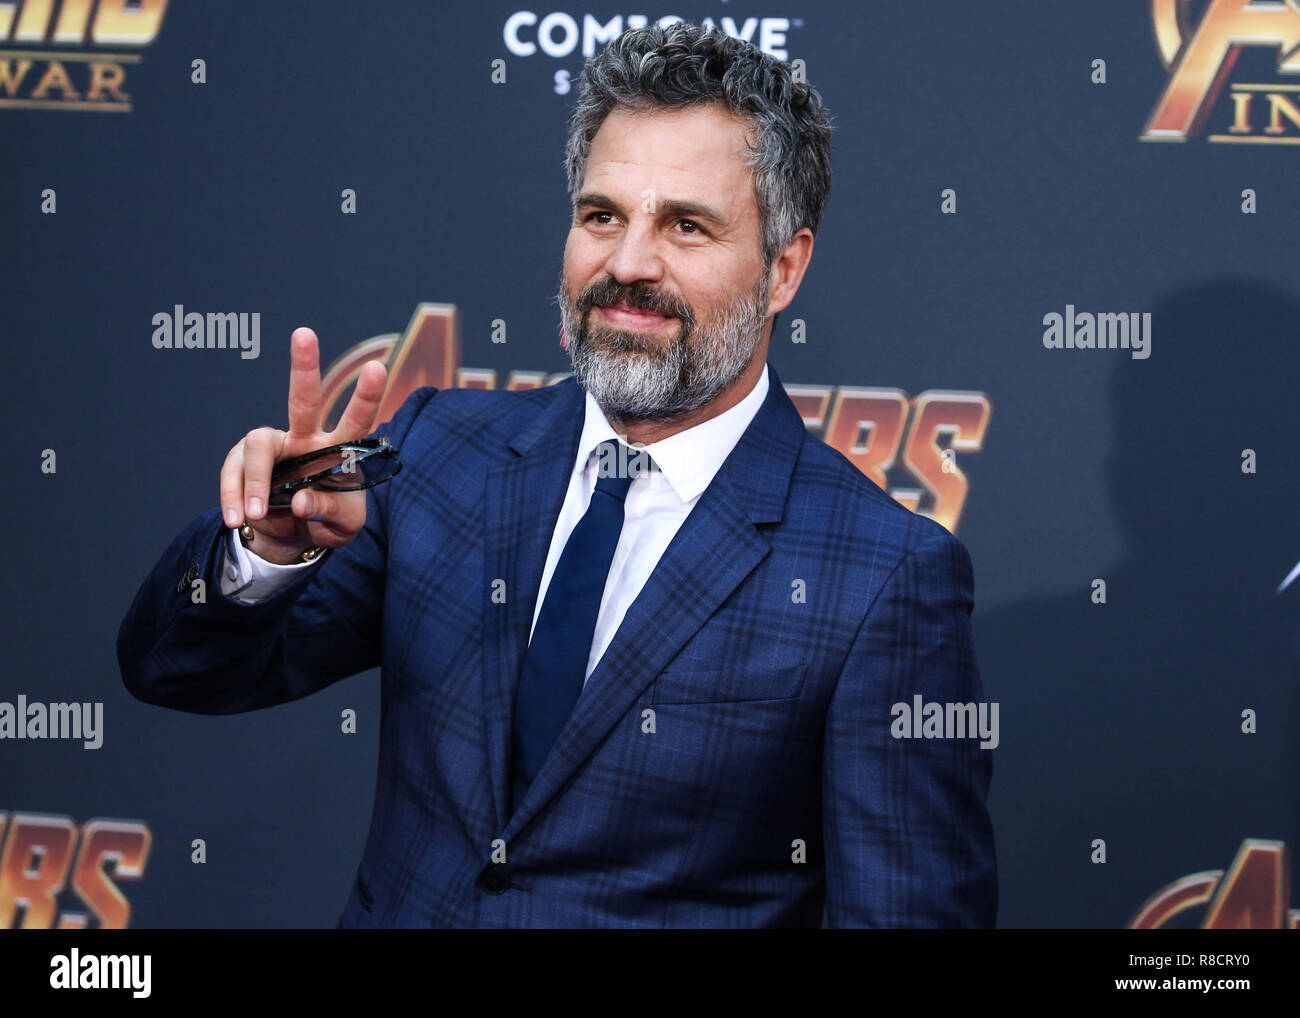 HOLLYWOOD, LOS ANGELES, CA, USA - APRIL 23: Mark Ruffalo at the World Premiere Of Disney And Marvel's 'Avengers: Infinity War' held at the El Capitan Theatre, Dolby Theatre and TCL Chinese Theatre IMAX on April 23, 2018 in Hollywood, Los Angeles, California, United States. (Photo by Xavier Collin/Image Press Agency) Stock Photo